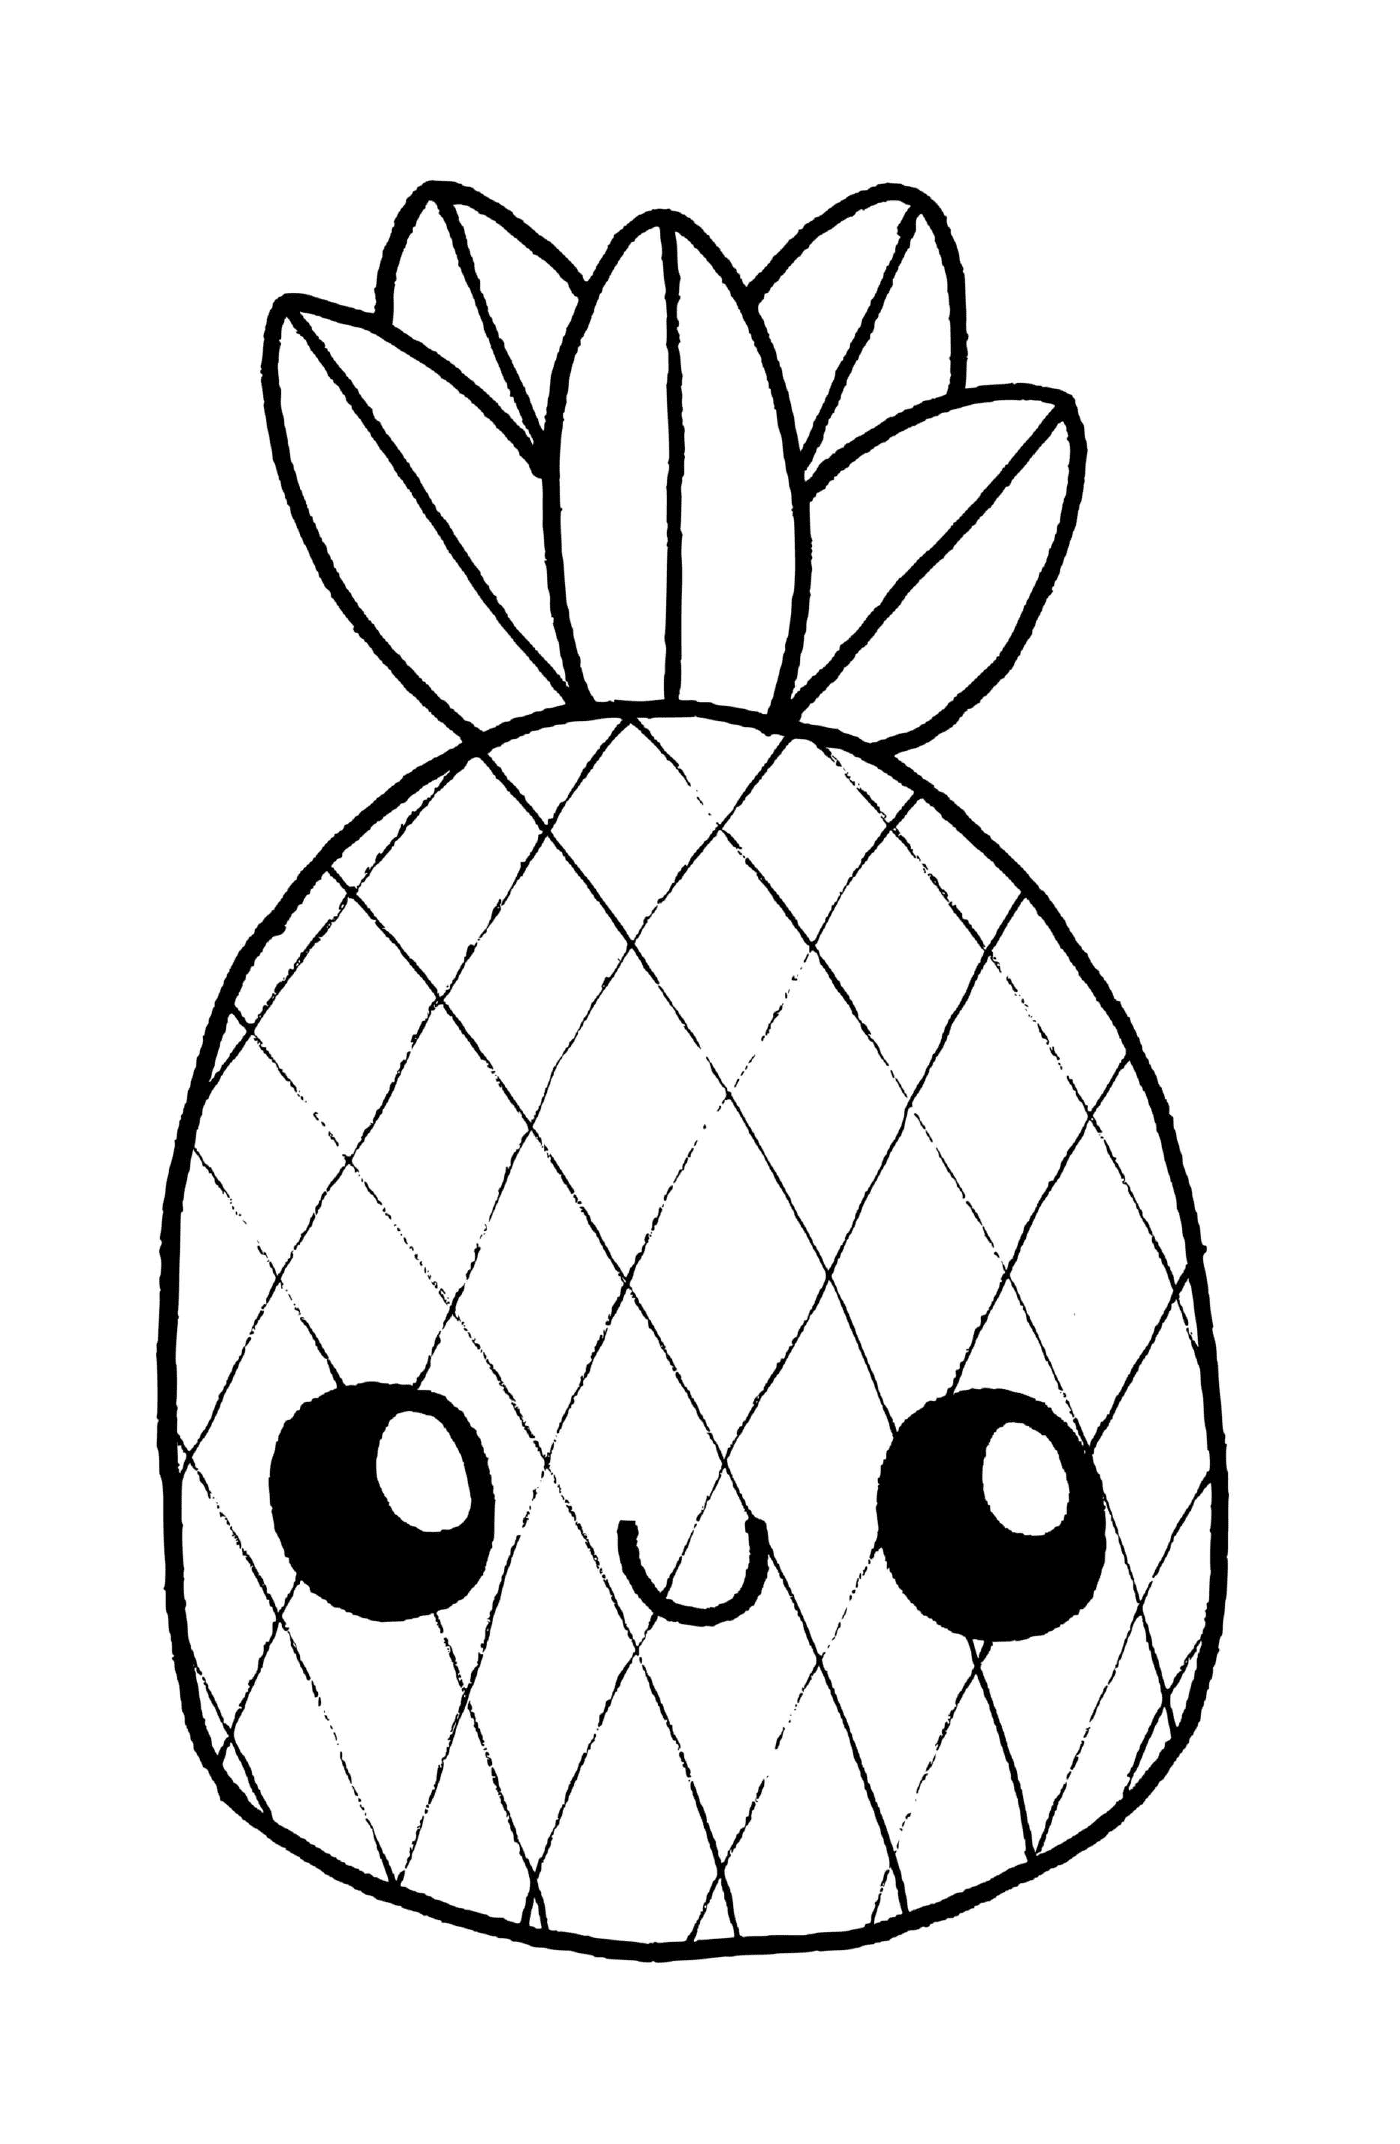  A cute and adorable pineapple with numbers for an educational math game for children 